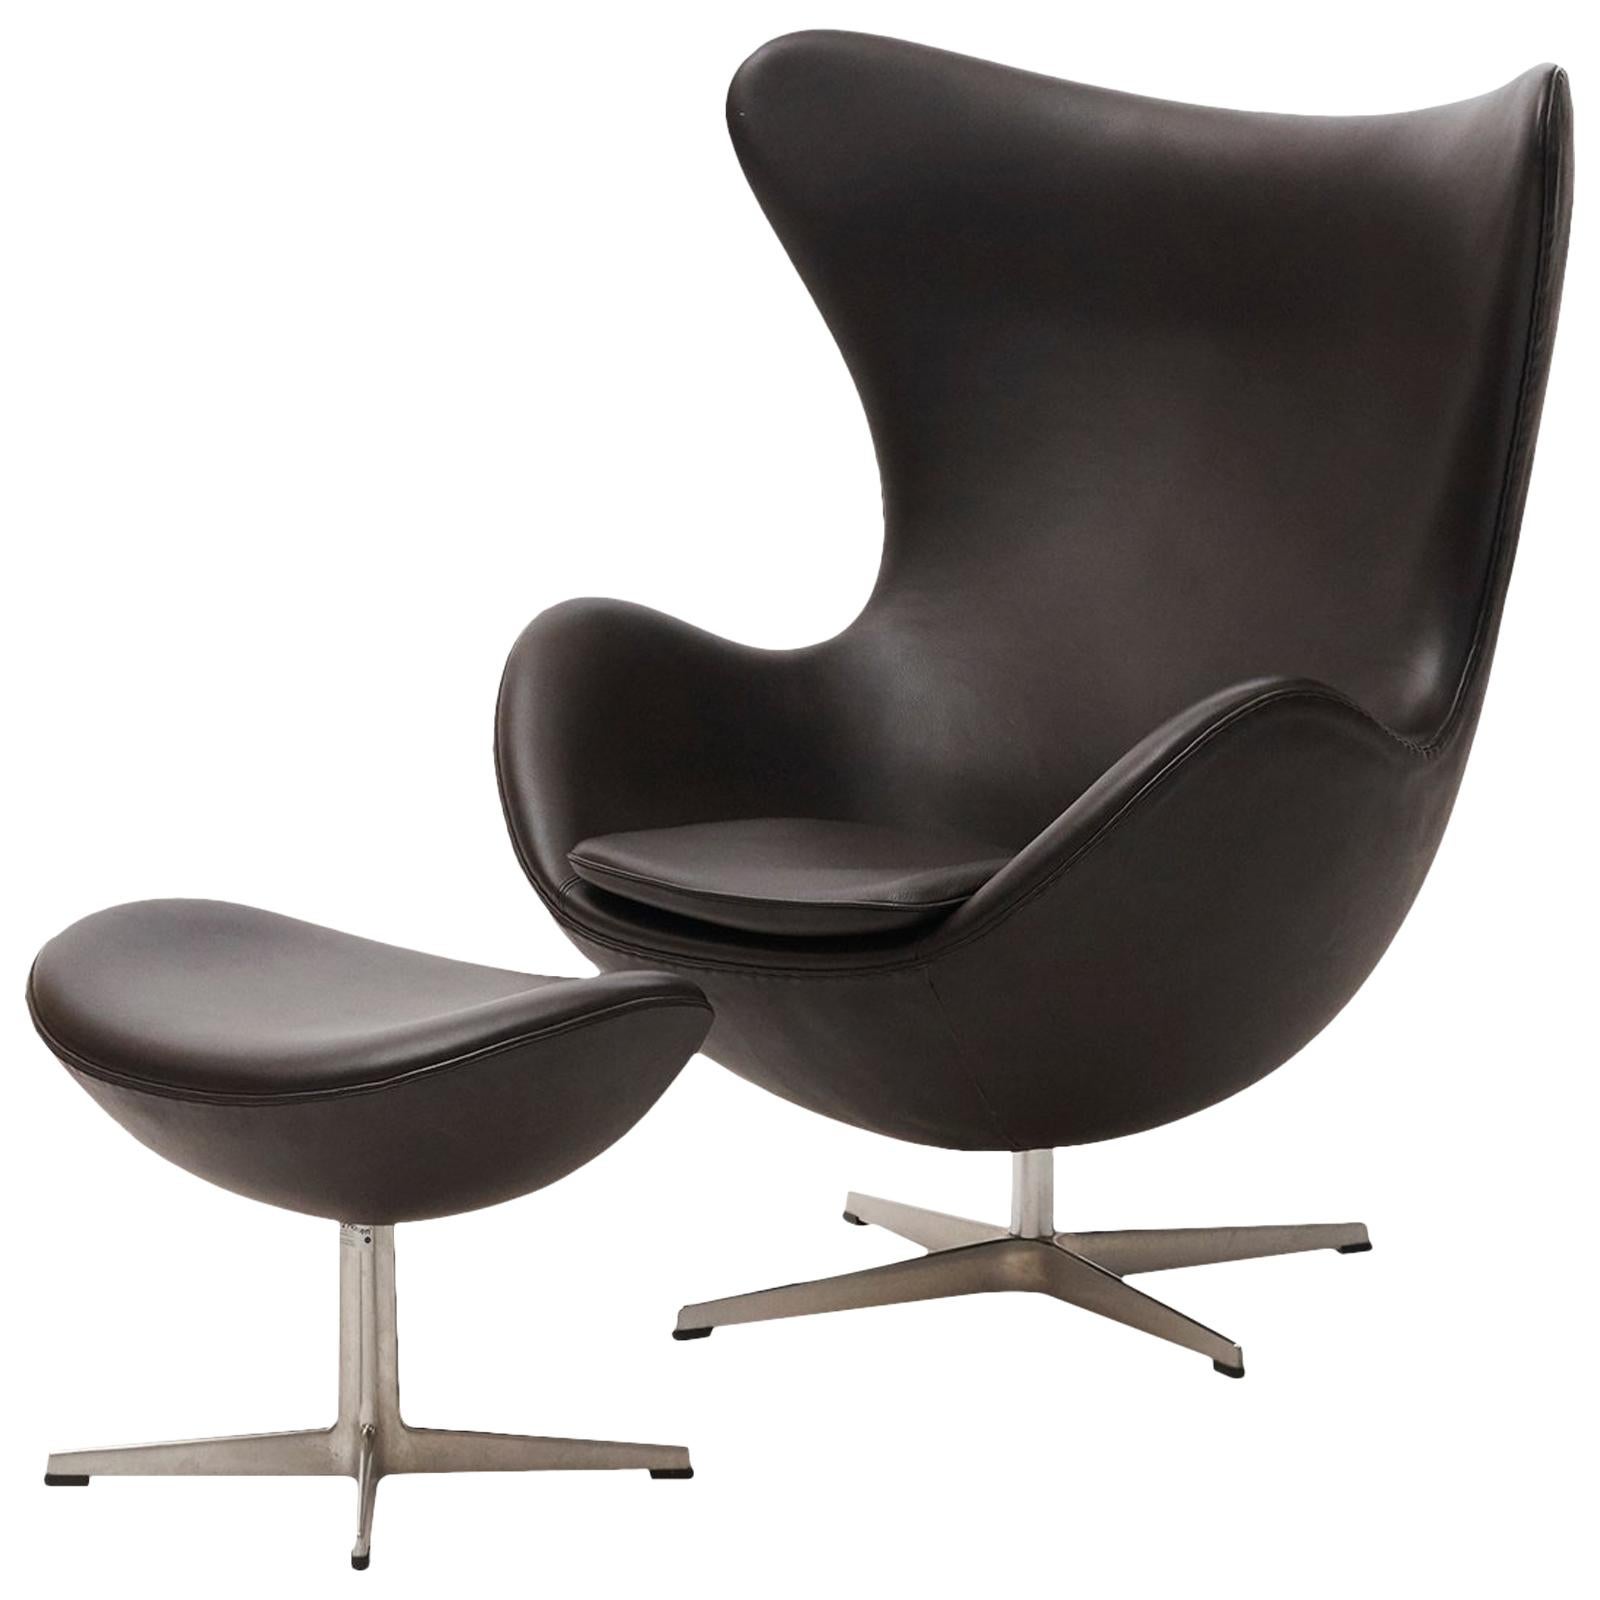 Arne Jacobsen "The Egg Chair" with Footstool in Dark Brown Leather